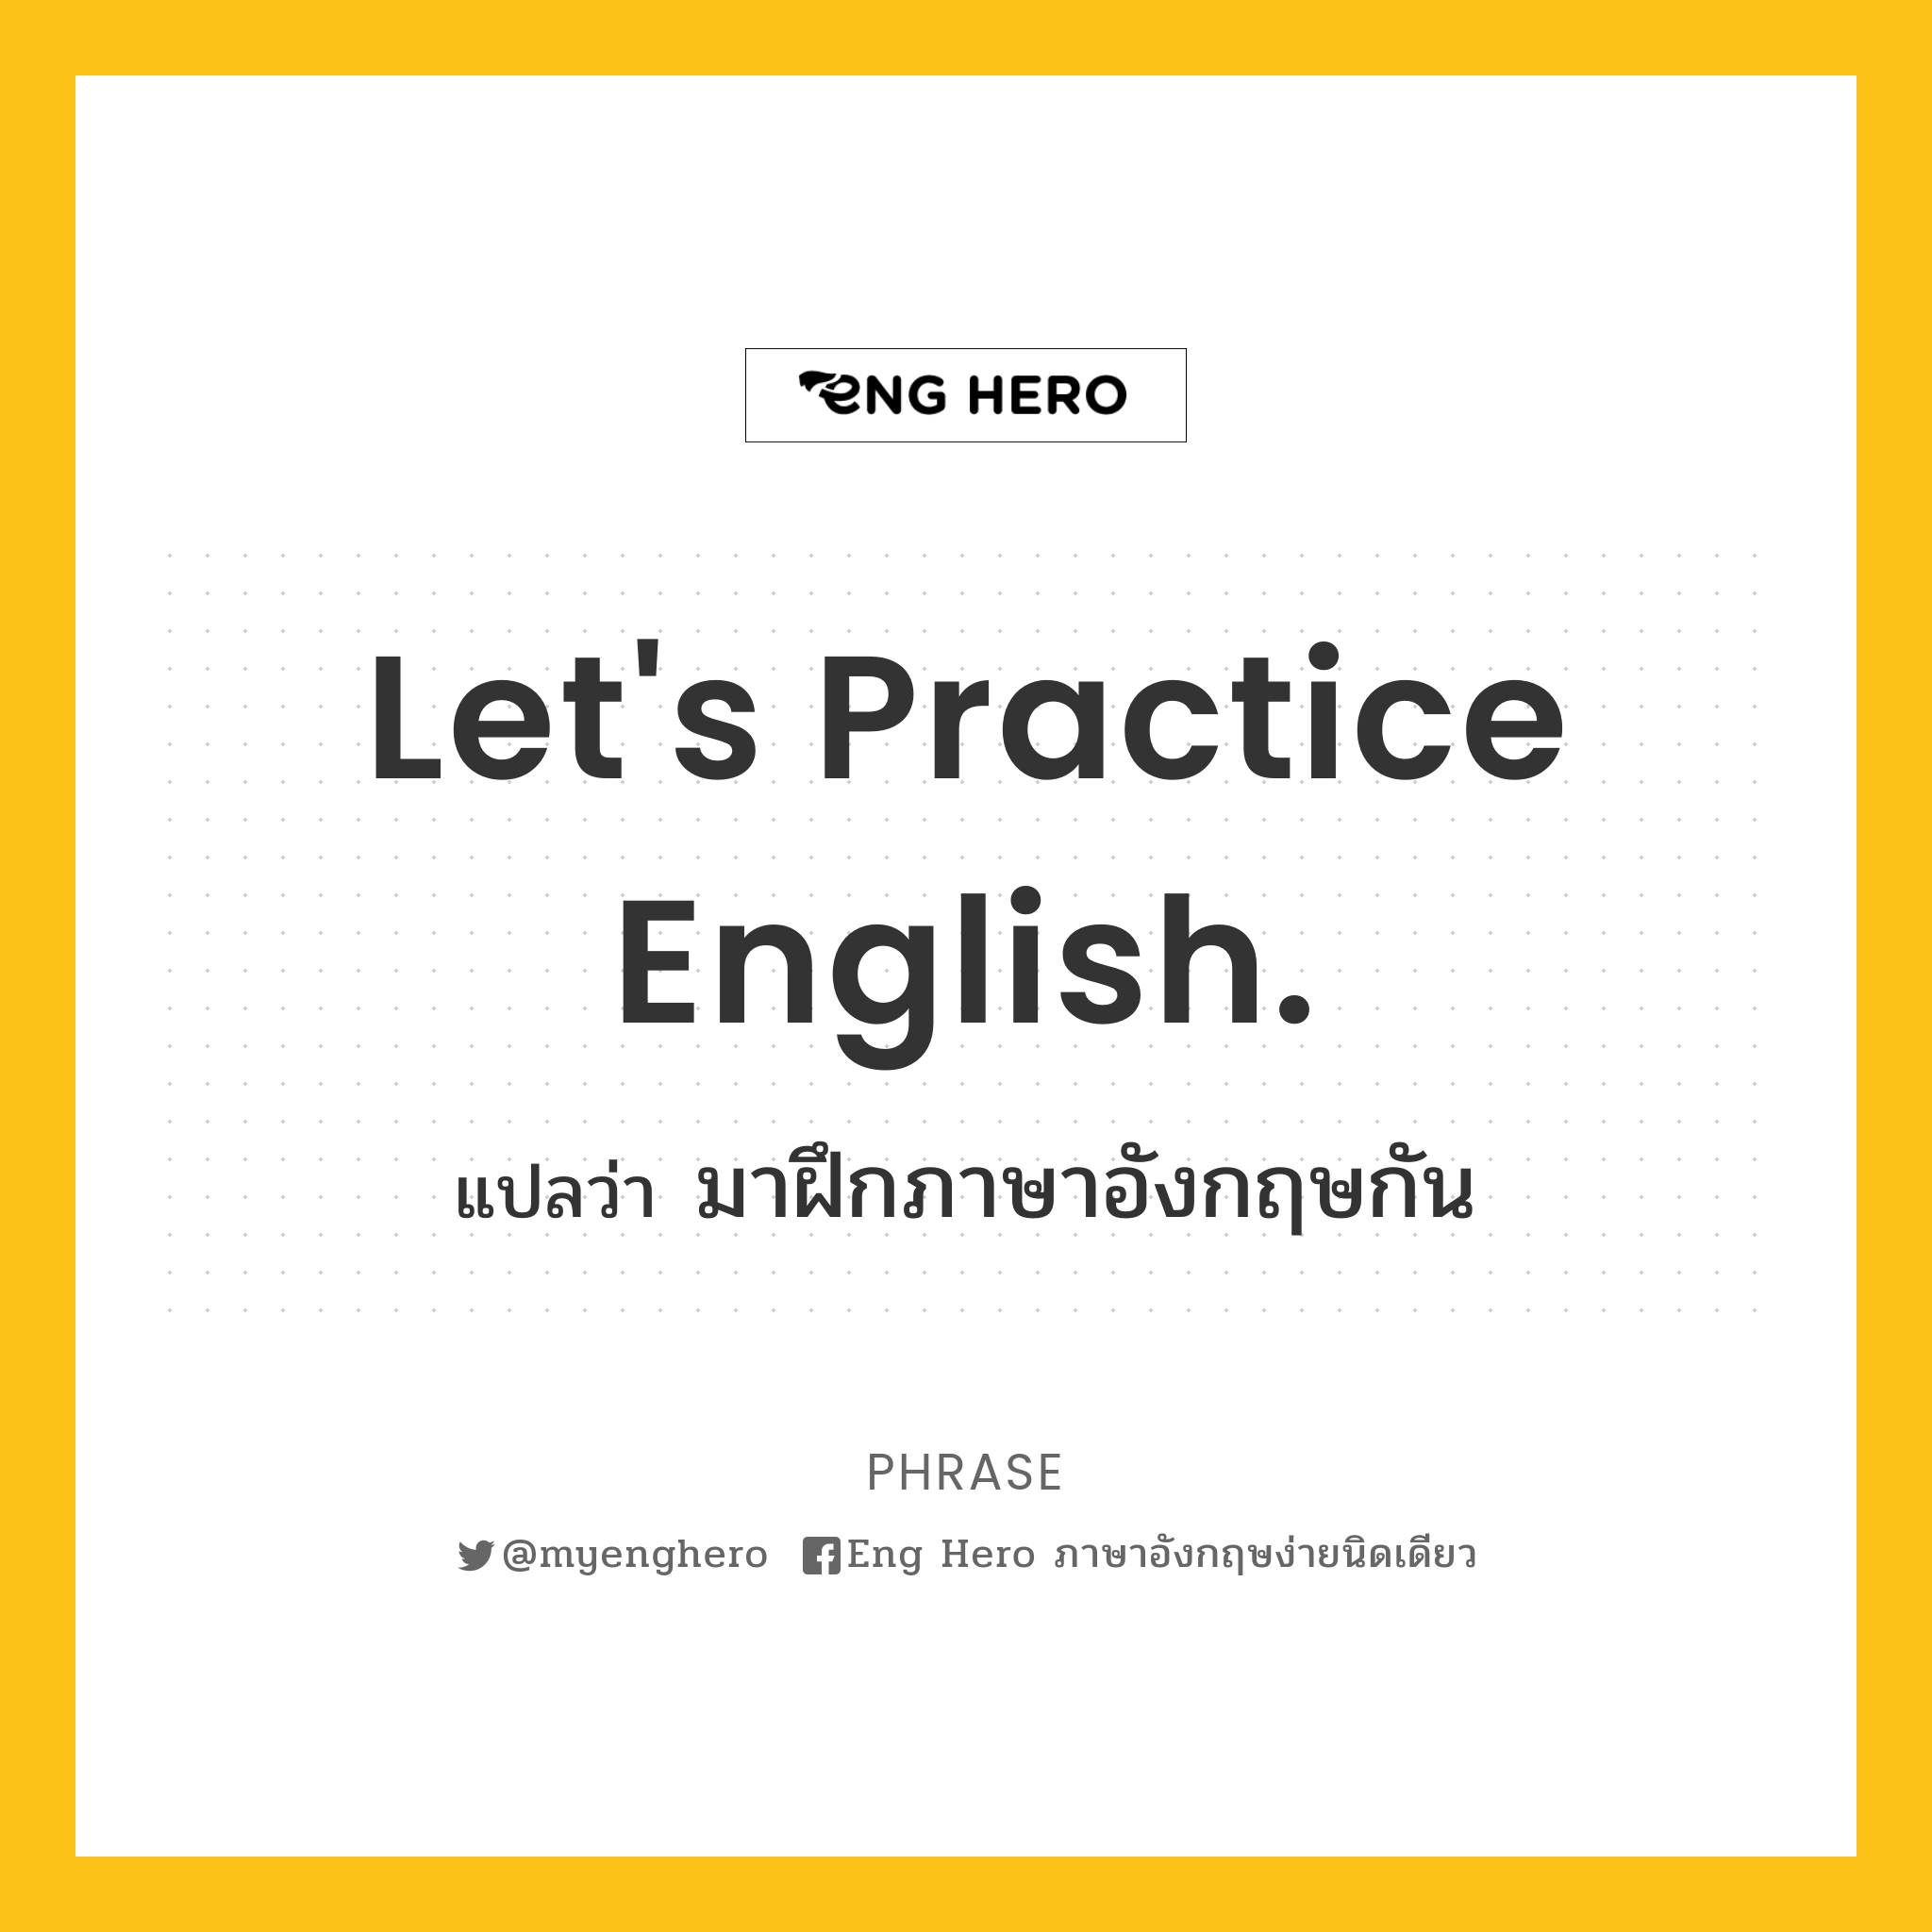 Let's practice English.